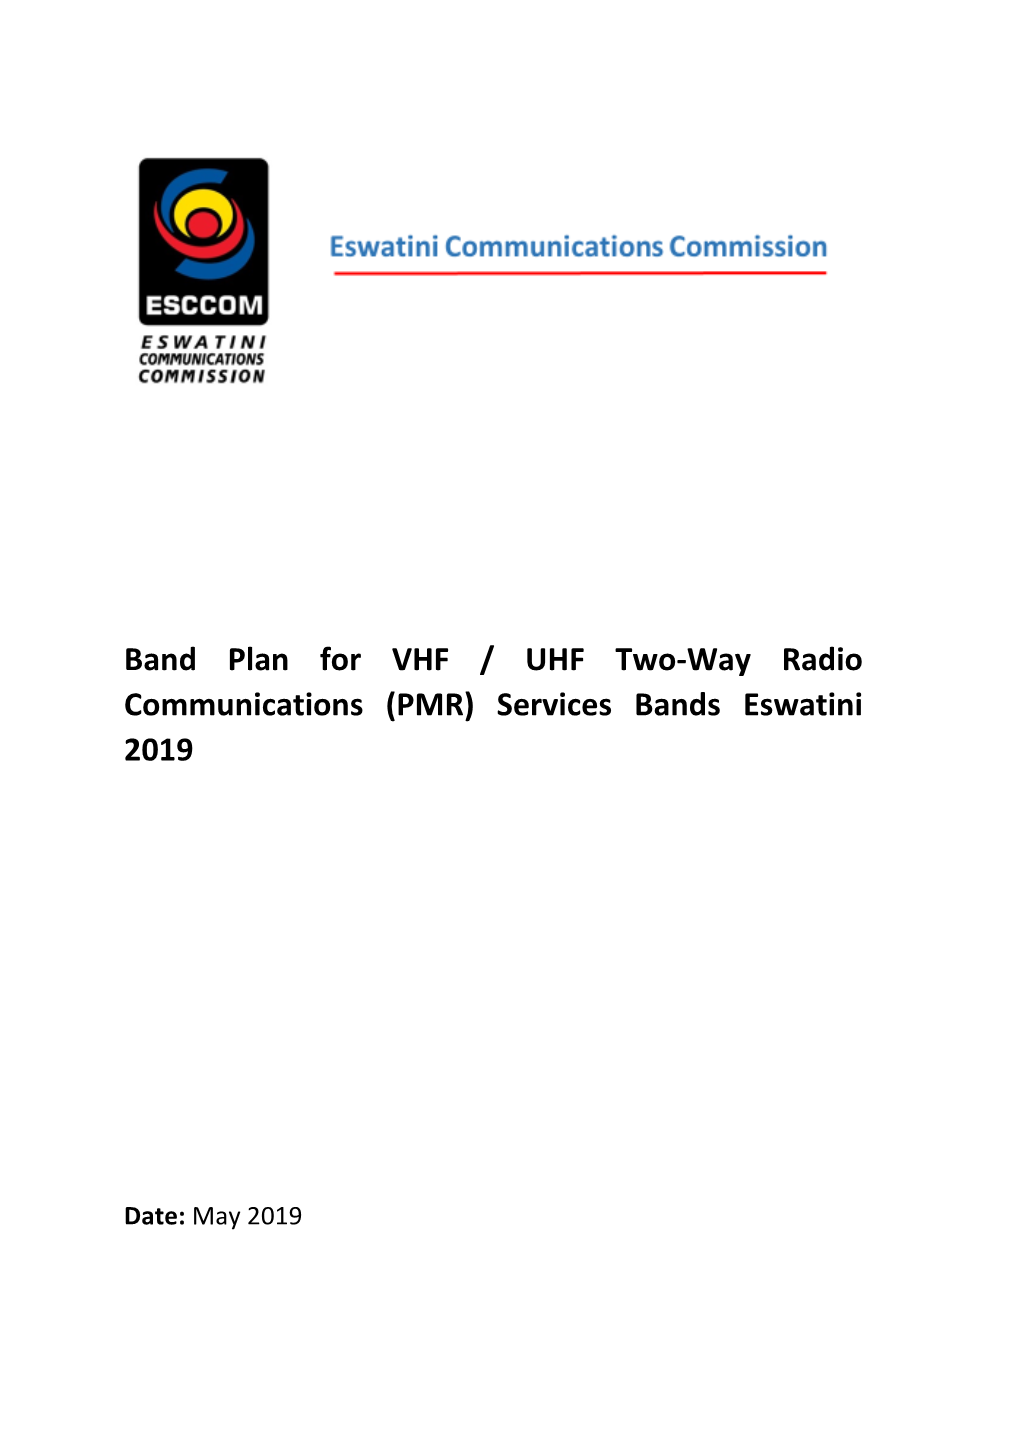 Band Plan for VHF / UHF Two-Way Radio Communications (PMR) Services Bands Eswatini 2019